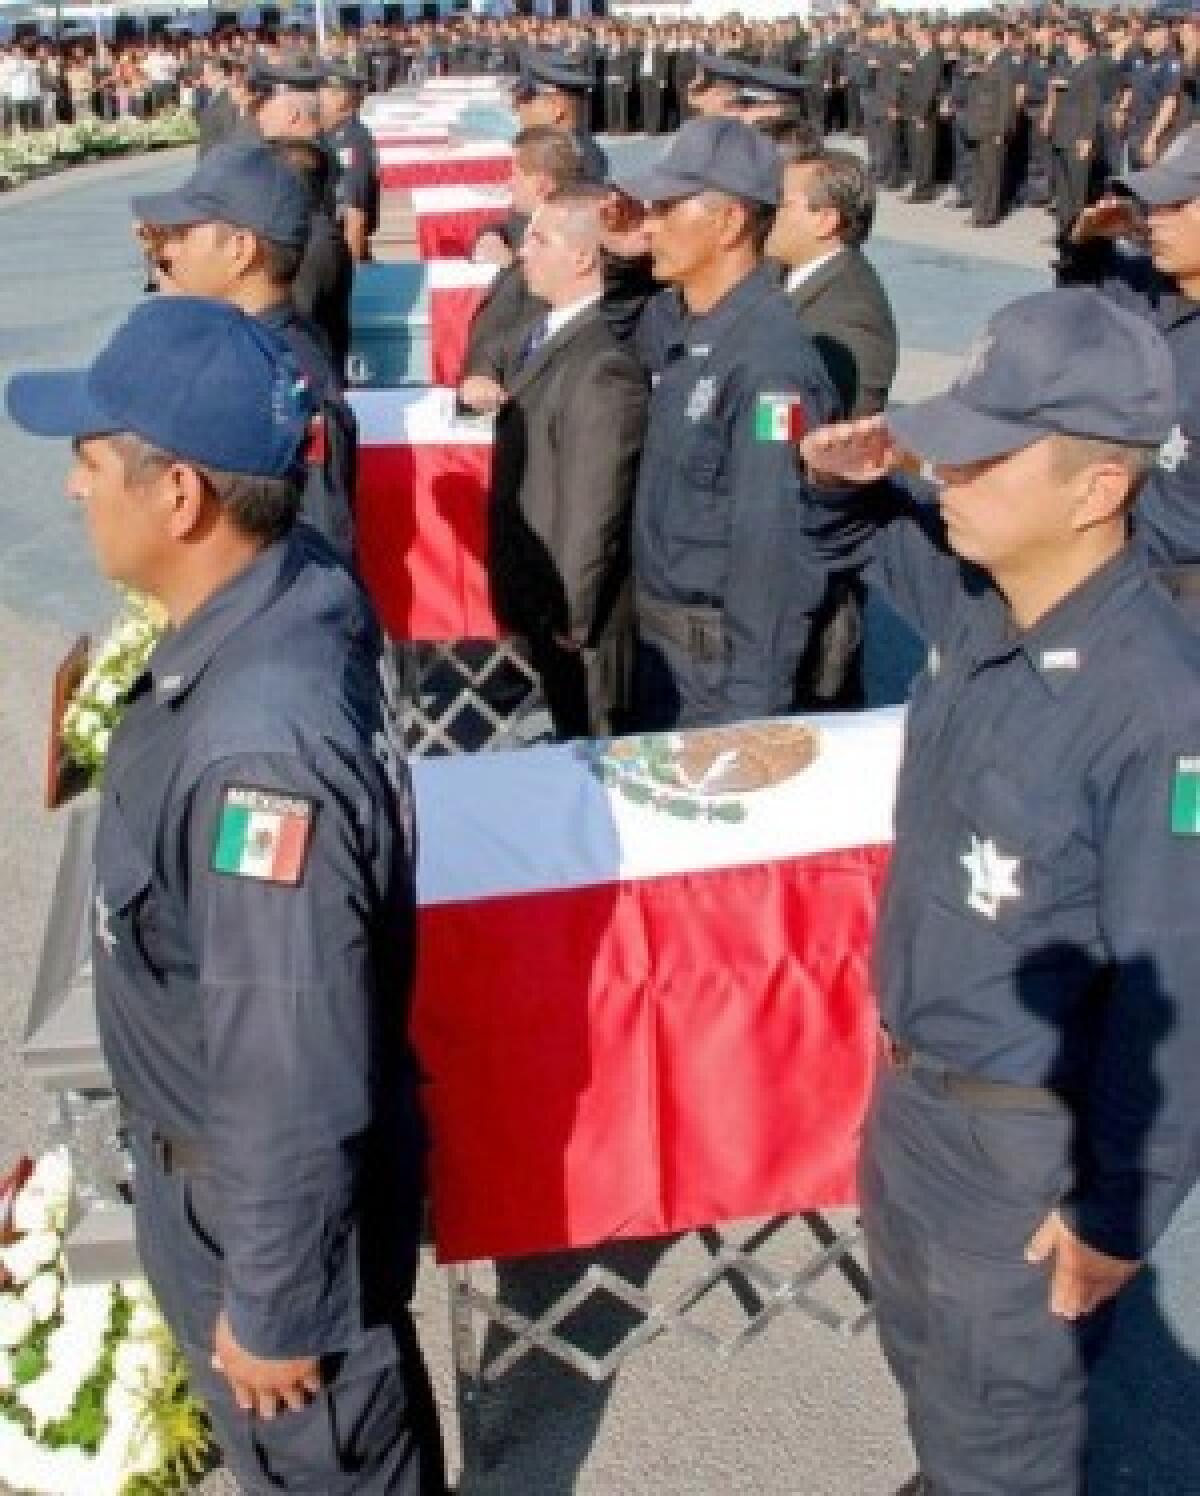 Federal police participate this week in the Mexico City funeral for 12 fellow officers whose bodies were found in a heap in the western state of Michoacan. The La Familia drug gang is suspected of killing them.